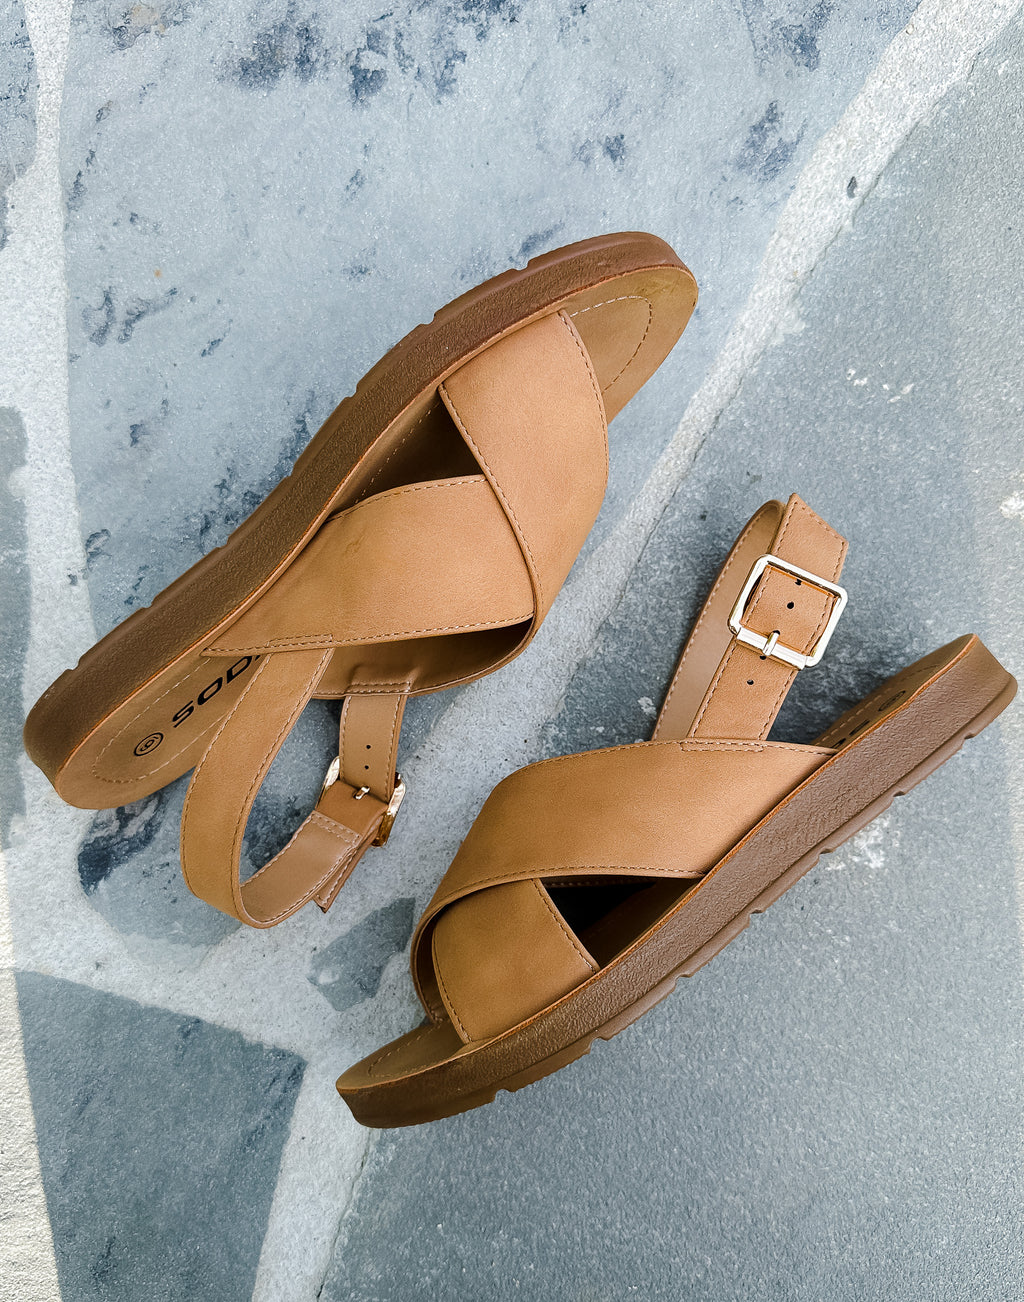 You'll be ready for anything on those sunny days with our Made For Sunny Days Sandals! With an adjustable ankle strap, our stylish sandals make it easy to elevate any summer look with a shoe made just for those bright, warm days. Put your best foot forward! 🌞